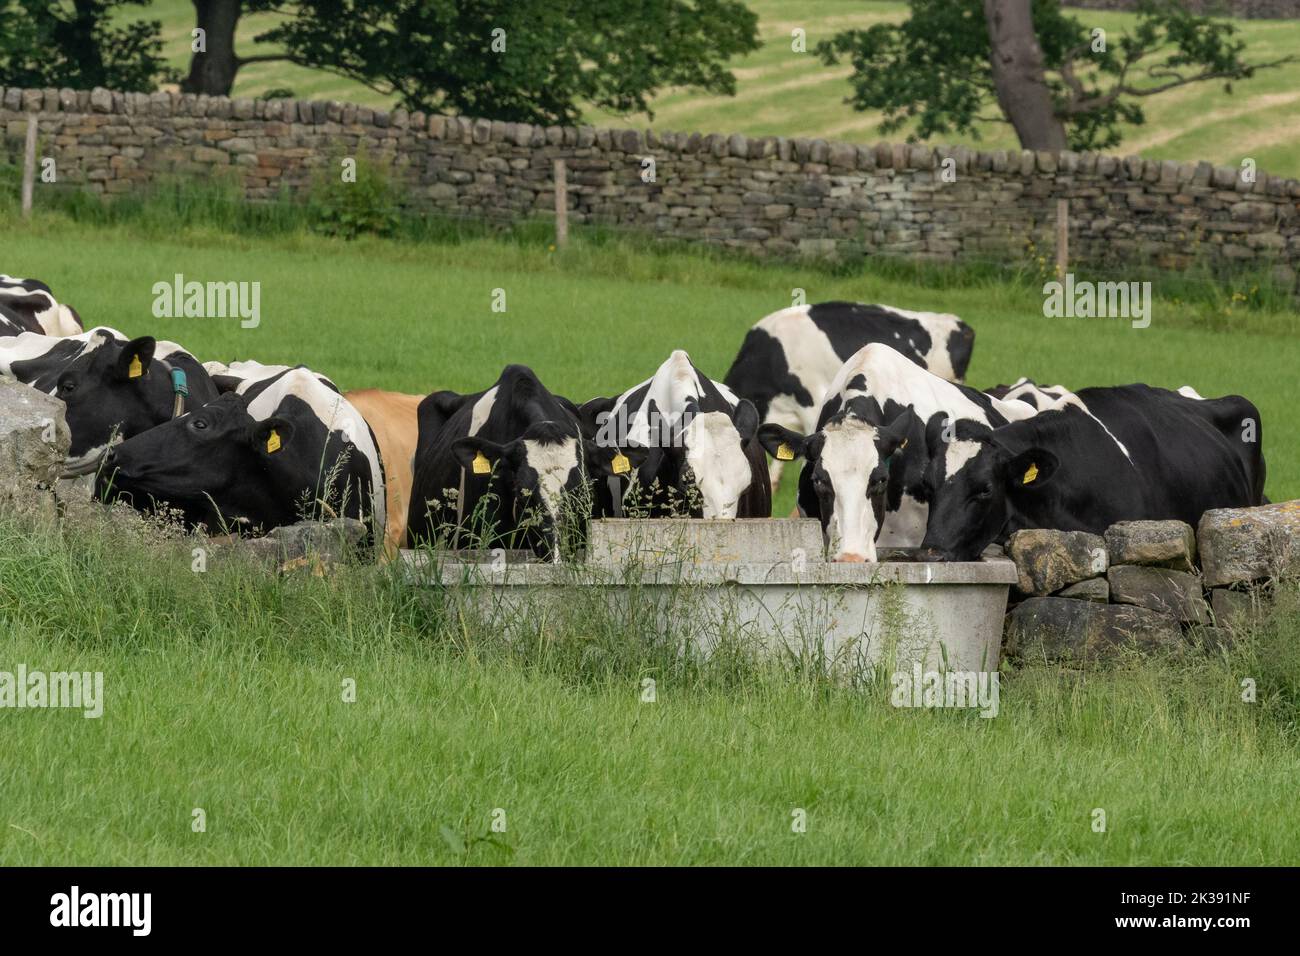 A single jersey cow with several friesian cows drinking from a water trough in Baildon, Yorkshire. Stock Photo